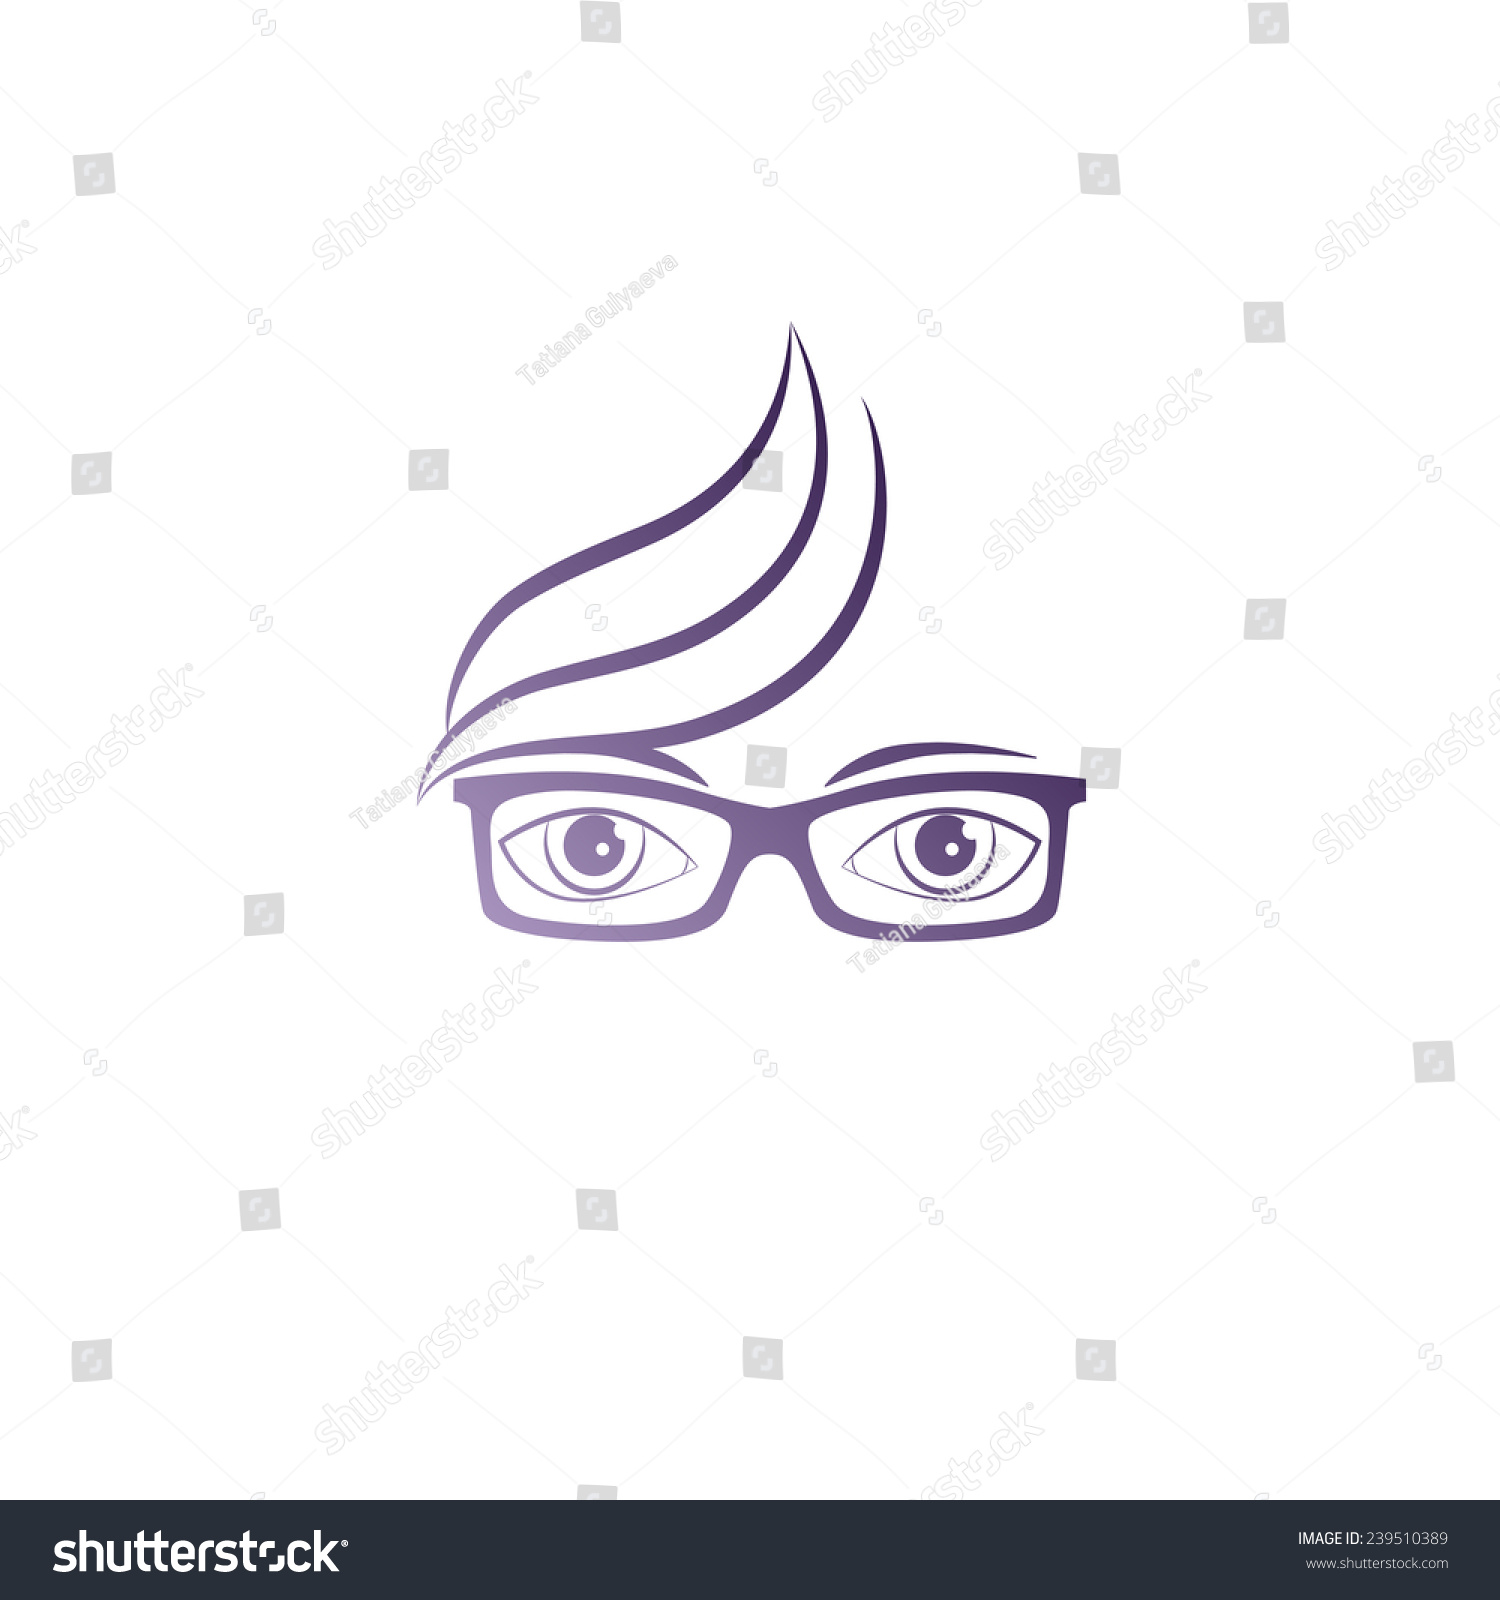 Silhouette Of A Girl S Face With Glasses Logo Stock